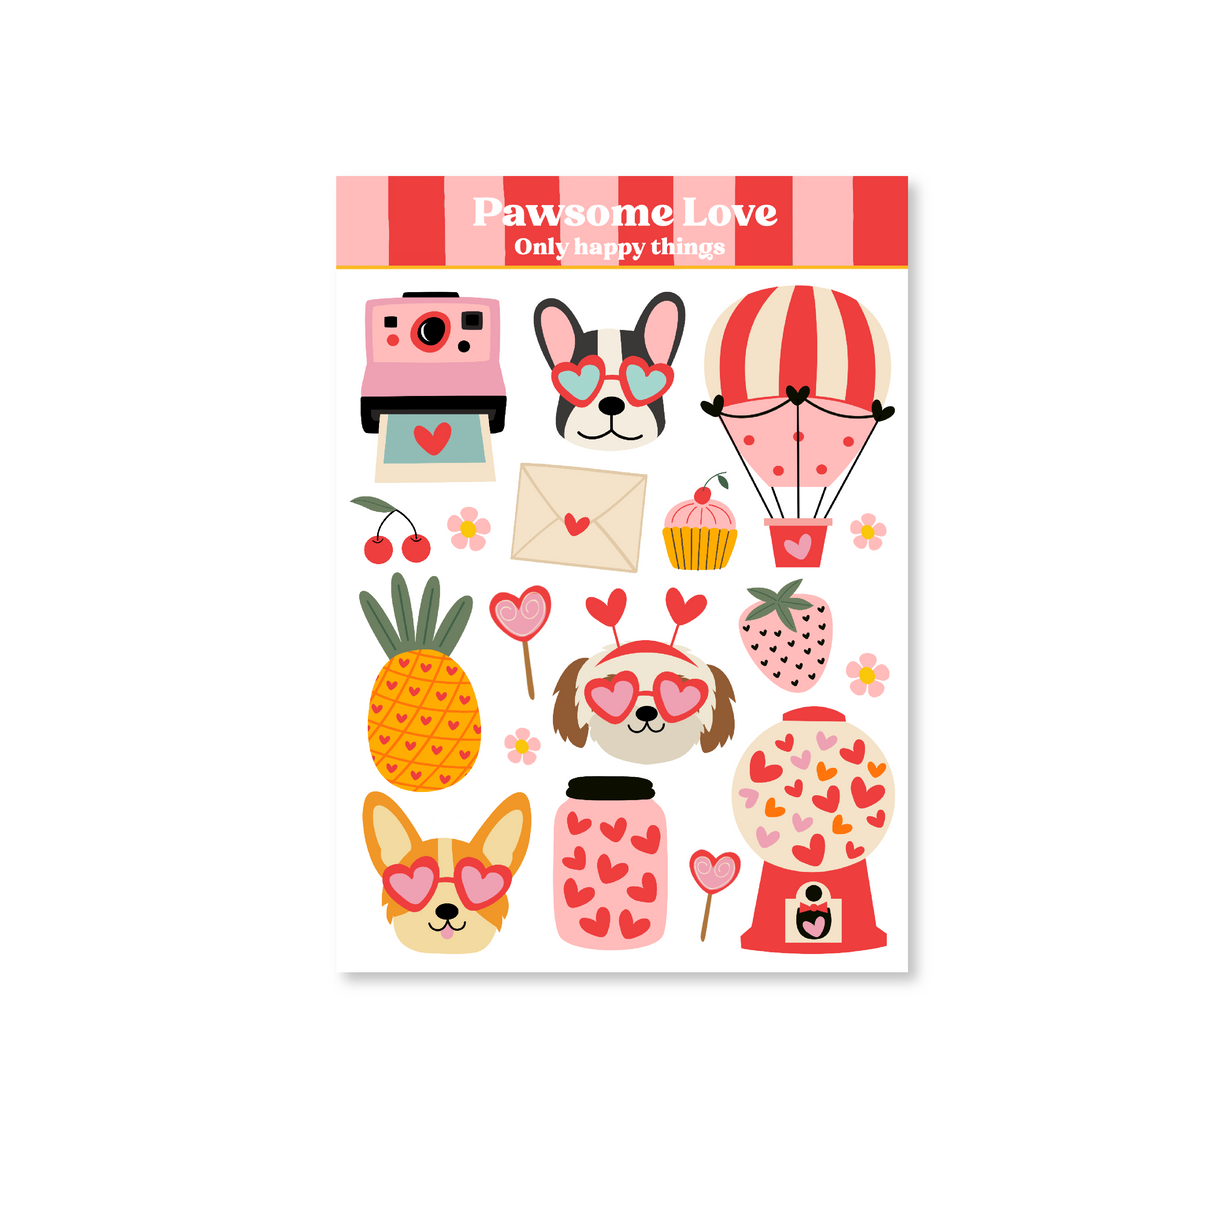 Pawsome Love Sticker Sheet with cartoon dogs, love hearts, hot air balloon, polaroid camera, gumball and lollipops in colours pink, red, orange and cream